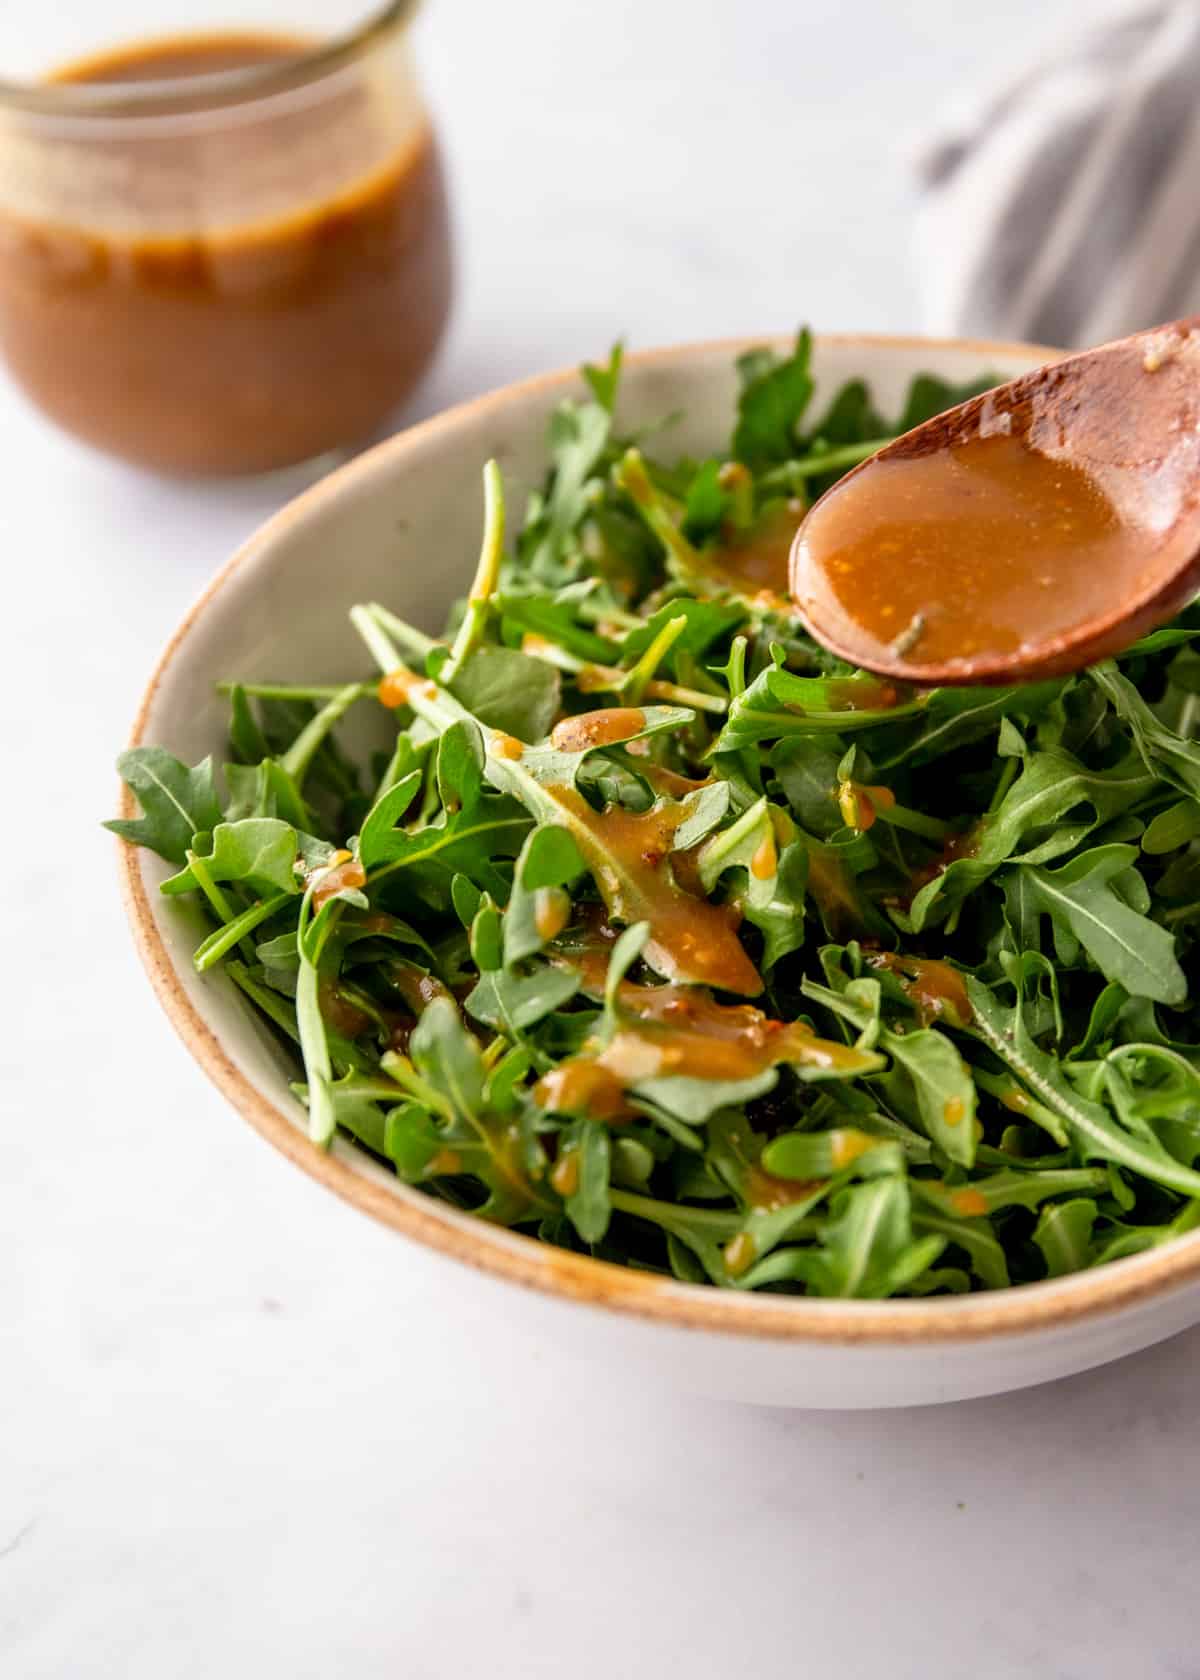 spooning vinaigrette over a salad in a white bowl